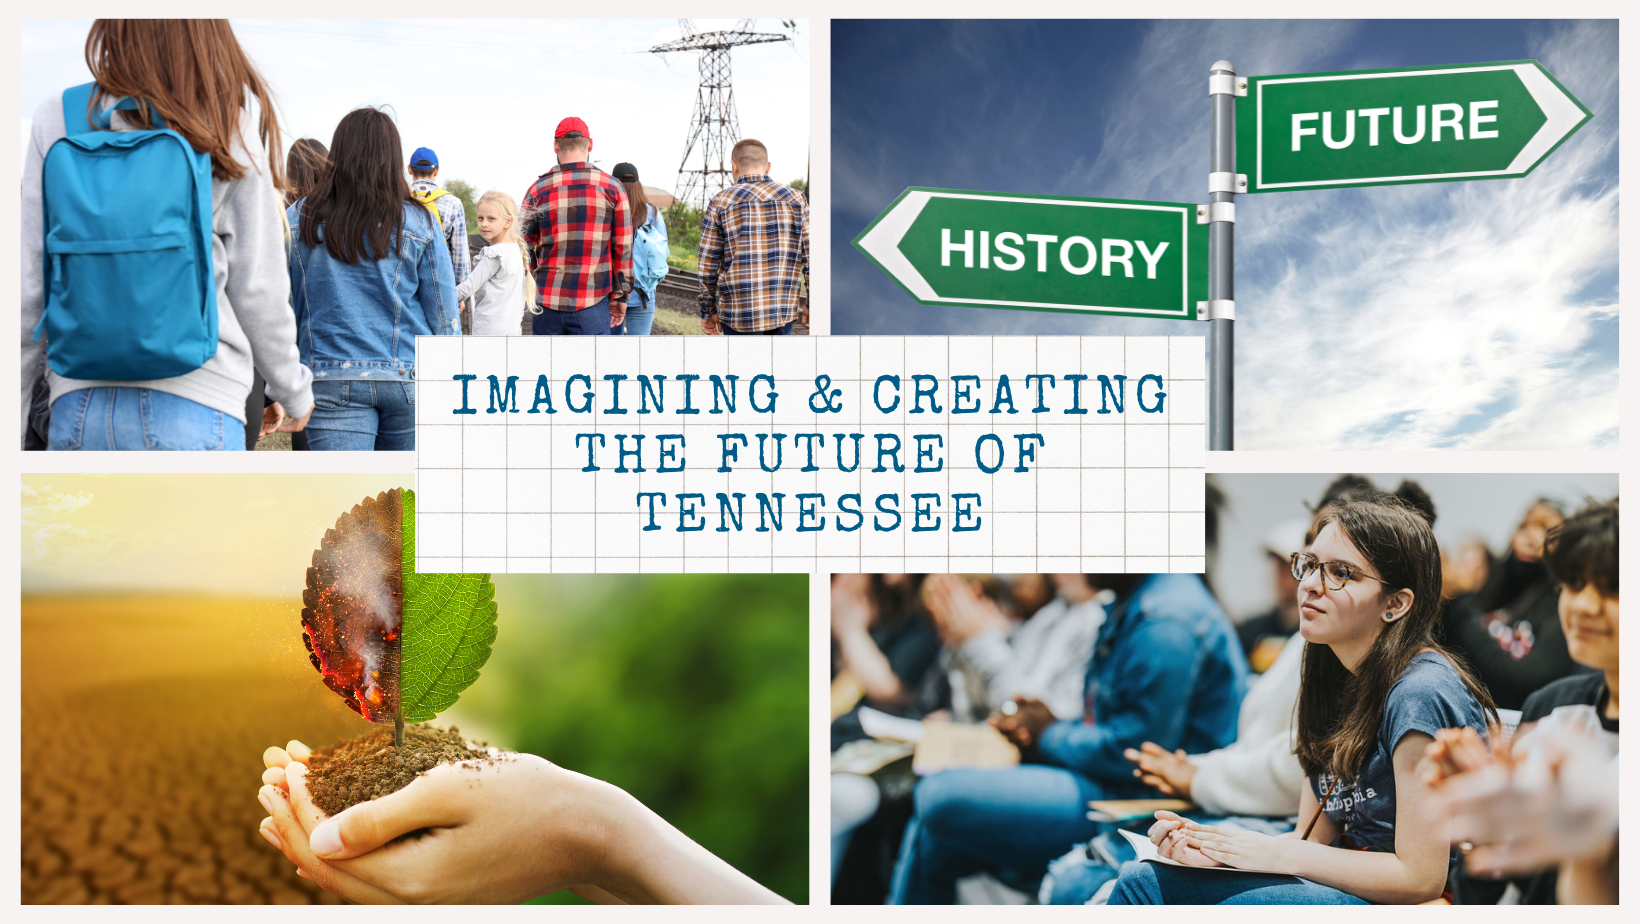 Photo collage of people walking, students in class, street signs that say History and Future, and a hand holding a leaf that is half green and half on fire. The text in the middle reads "Imagining & Creating the Future of Tennessee." Banner image for Shared Futures Lab.